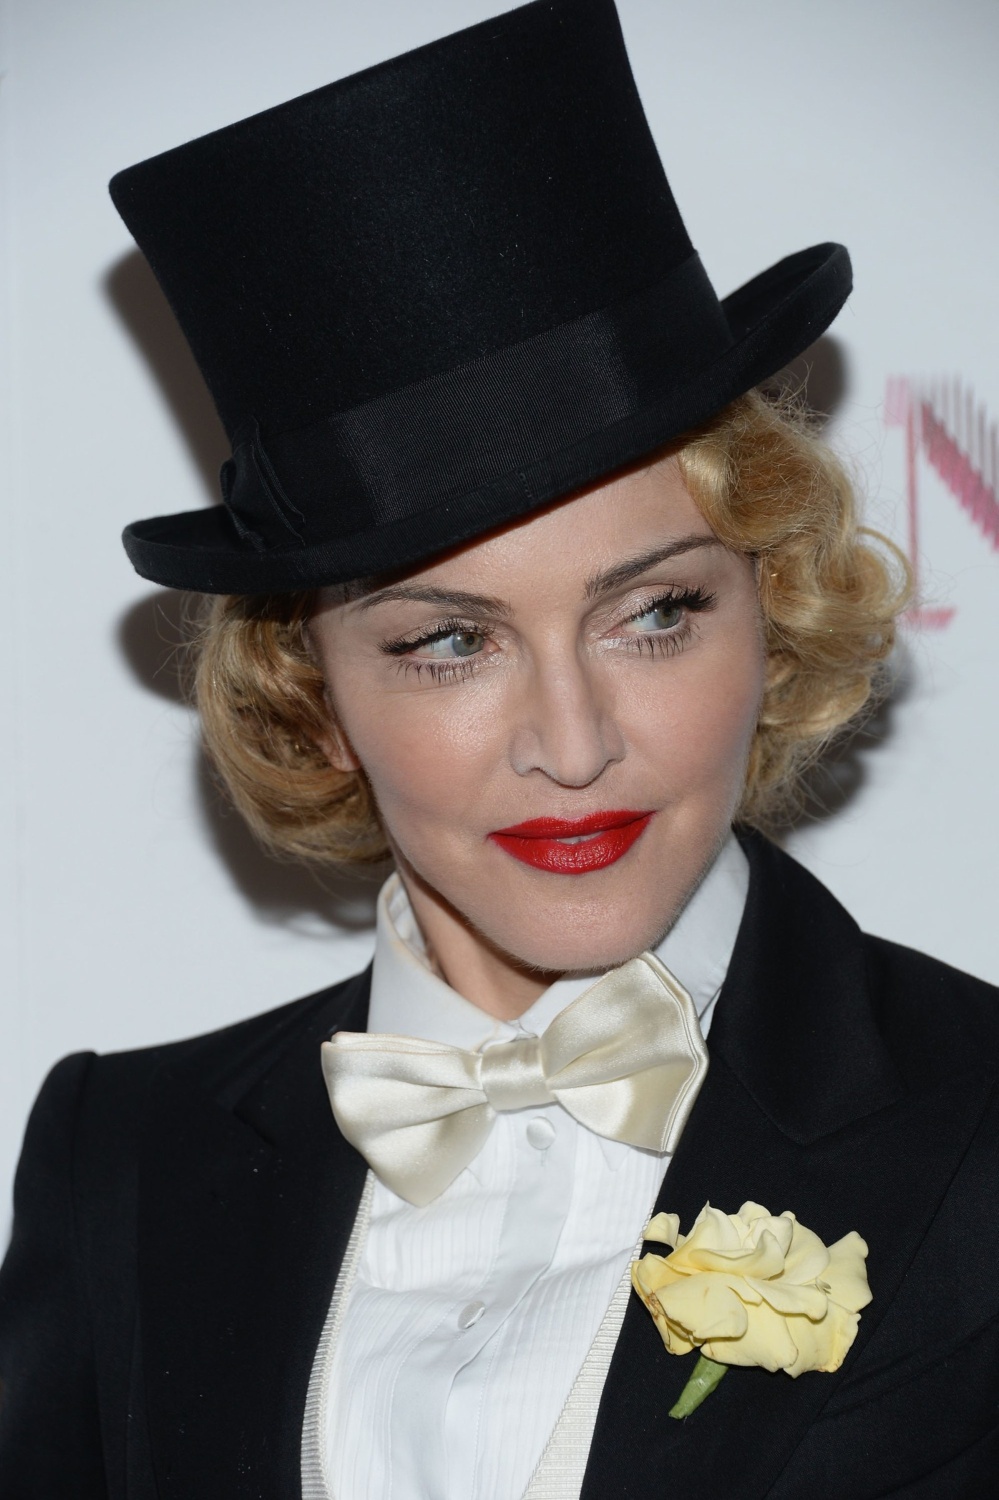 20130619-pictures-madonna-mdna-tour-premiere-screening-hq-02.jpg